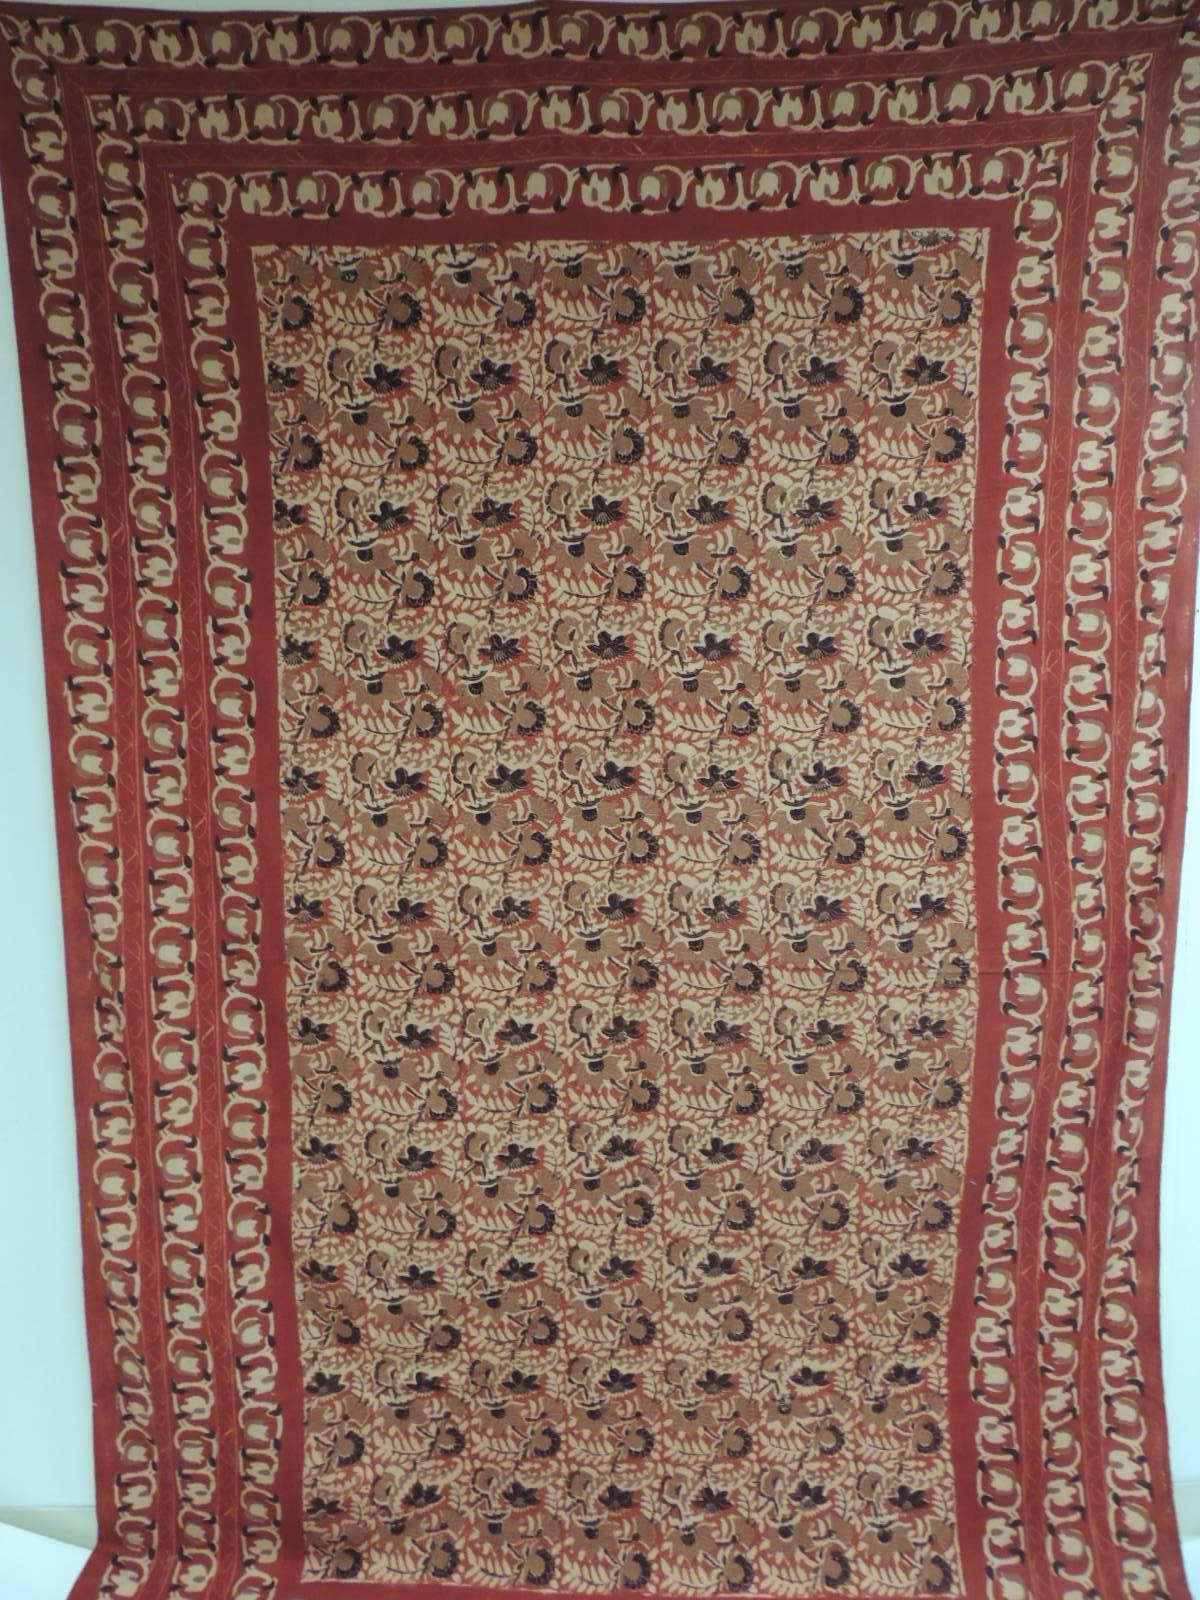 1970s Paisley Qalamkar coverlet from India. Qalamkar is a form of Persian woodblock printed textile that originates from Esfahan in central Iran over 400 years ago. Unlike lesser quality, machine-printed fabrics coming out of India, Pakistan and